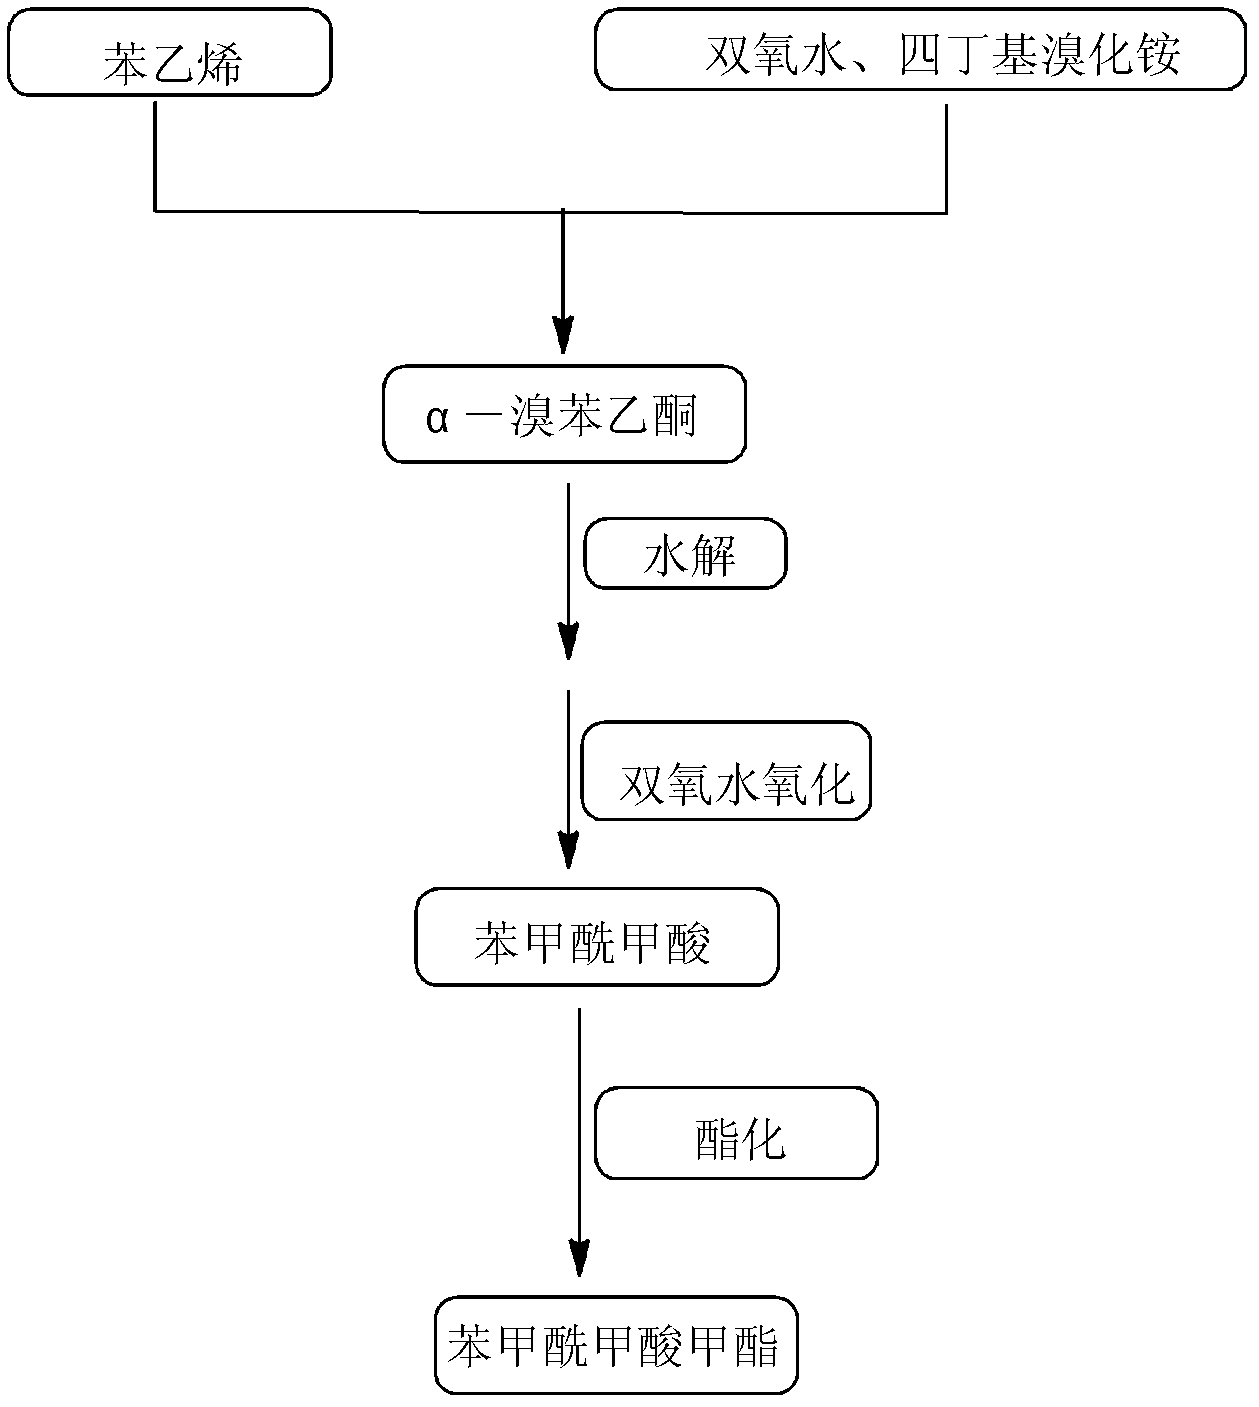 High-selectivity synthesis method of benzoyl formic acid